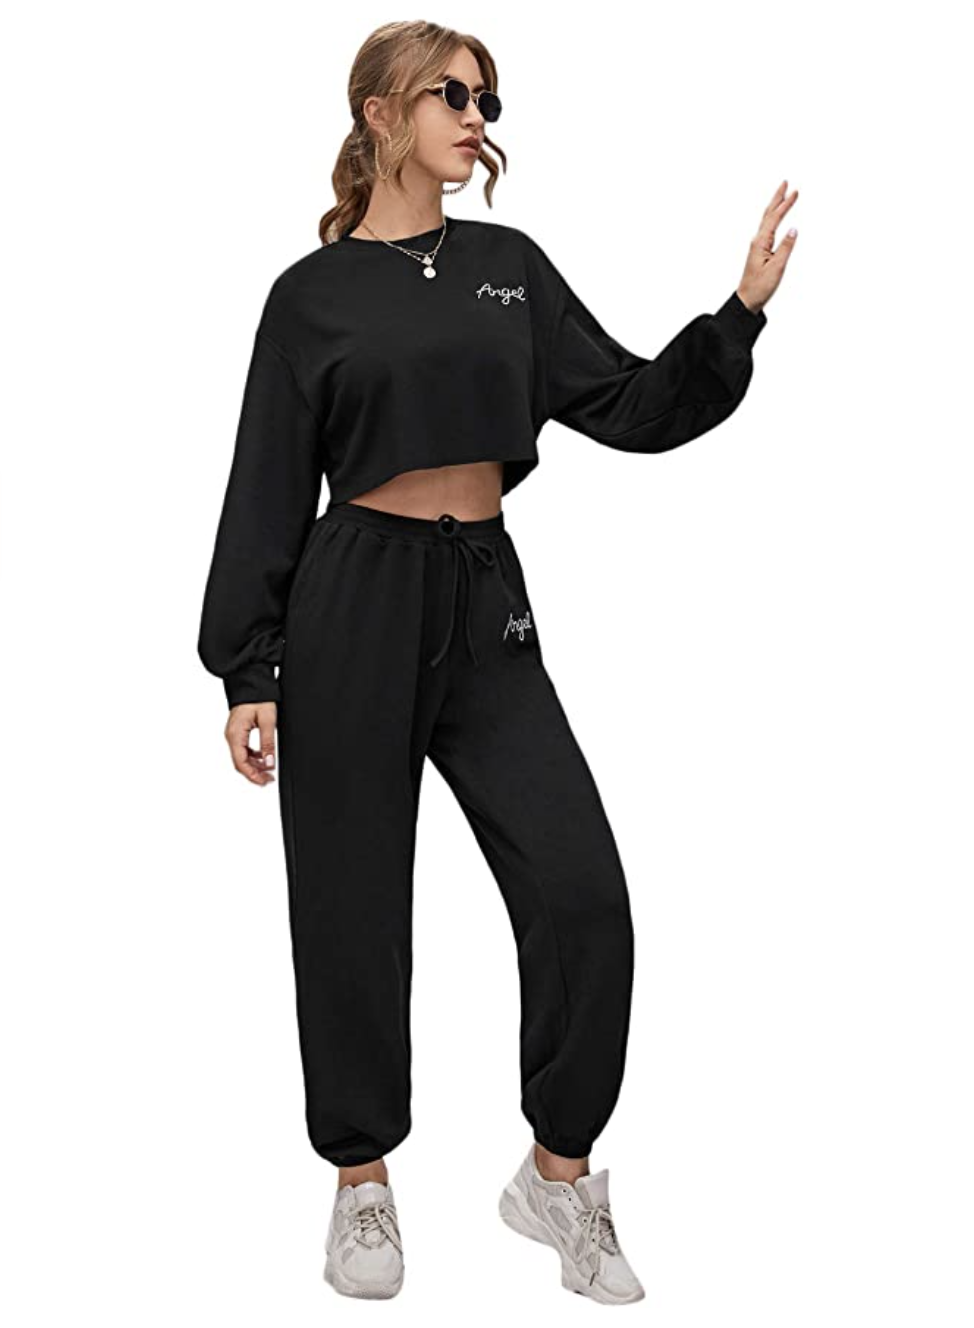 SweatyRocks Affordable Two-Piece Set Nails the Athleisure Look